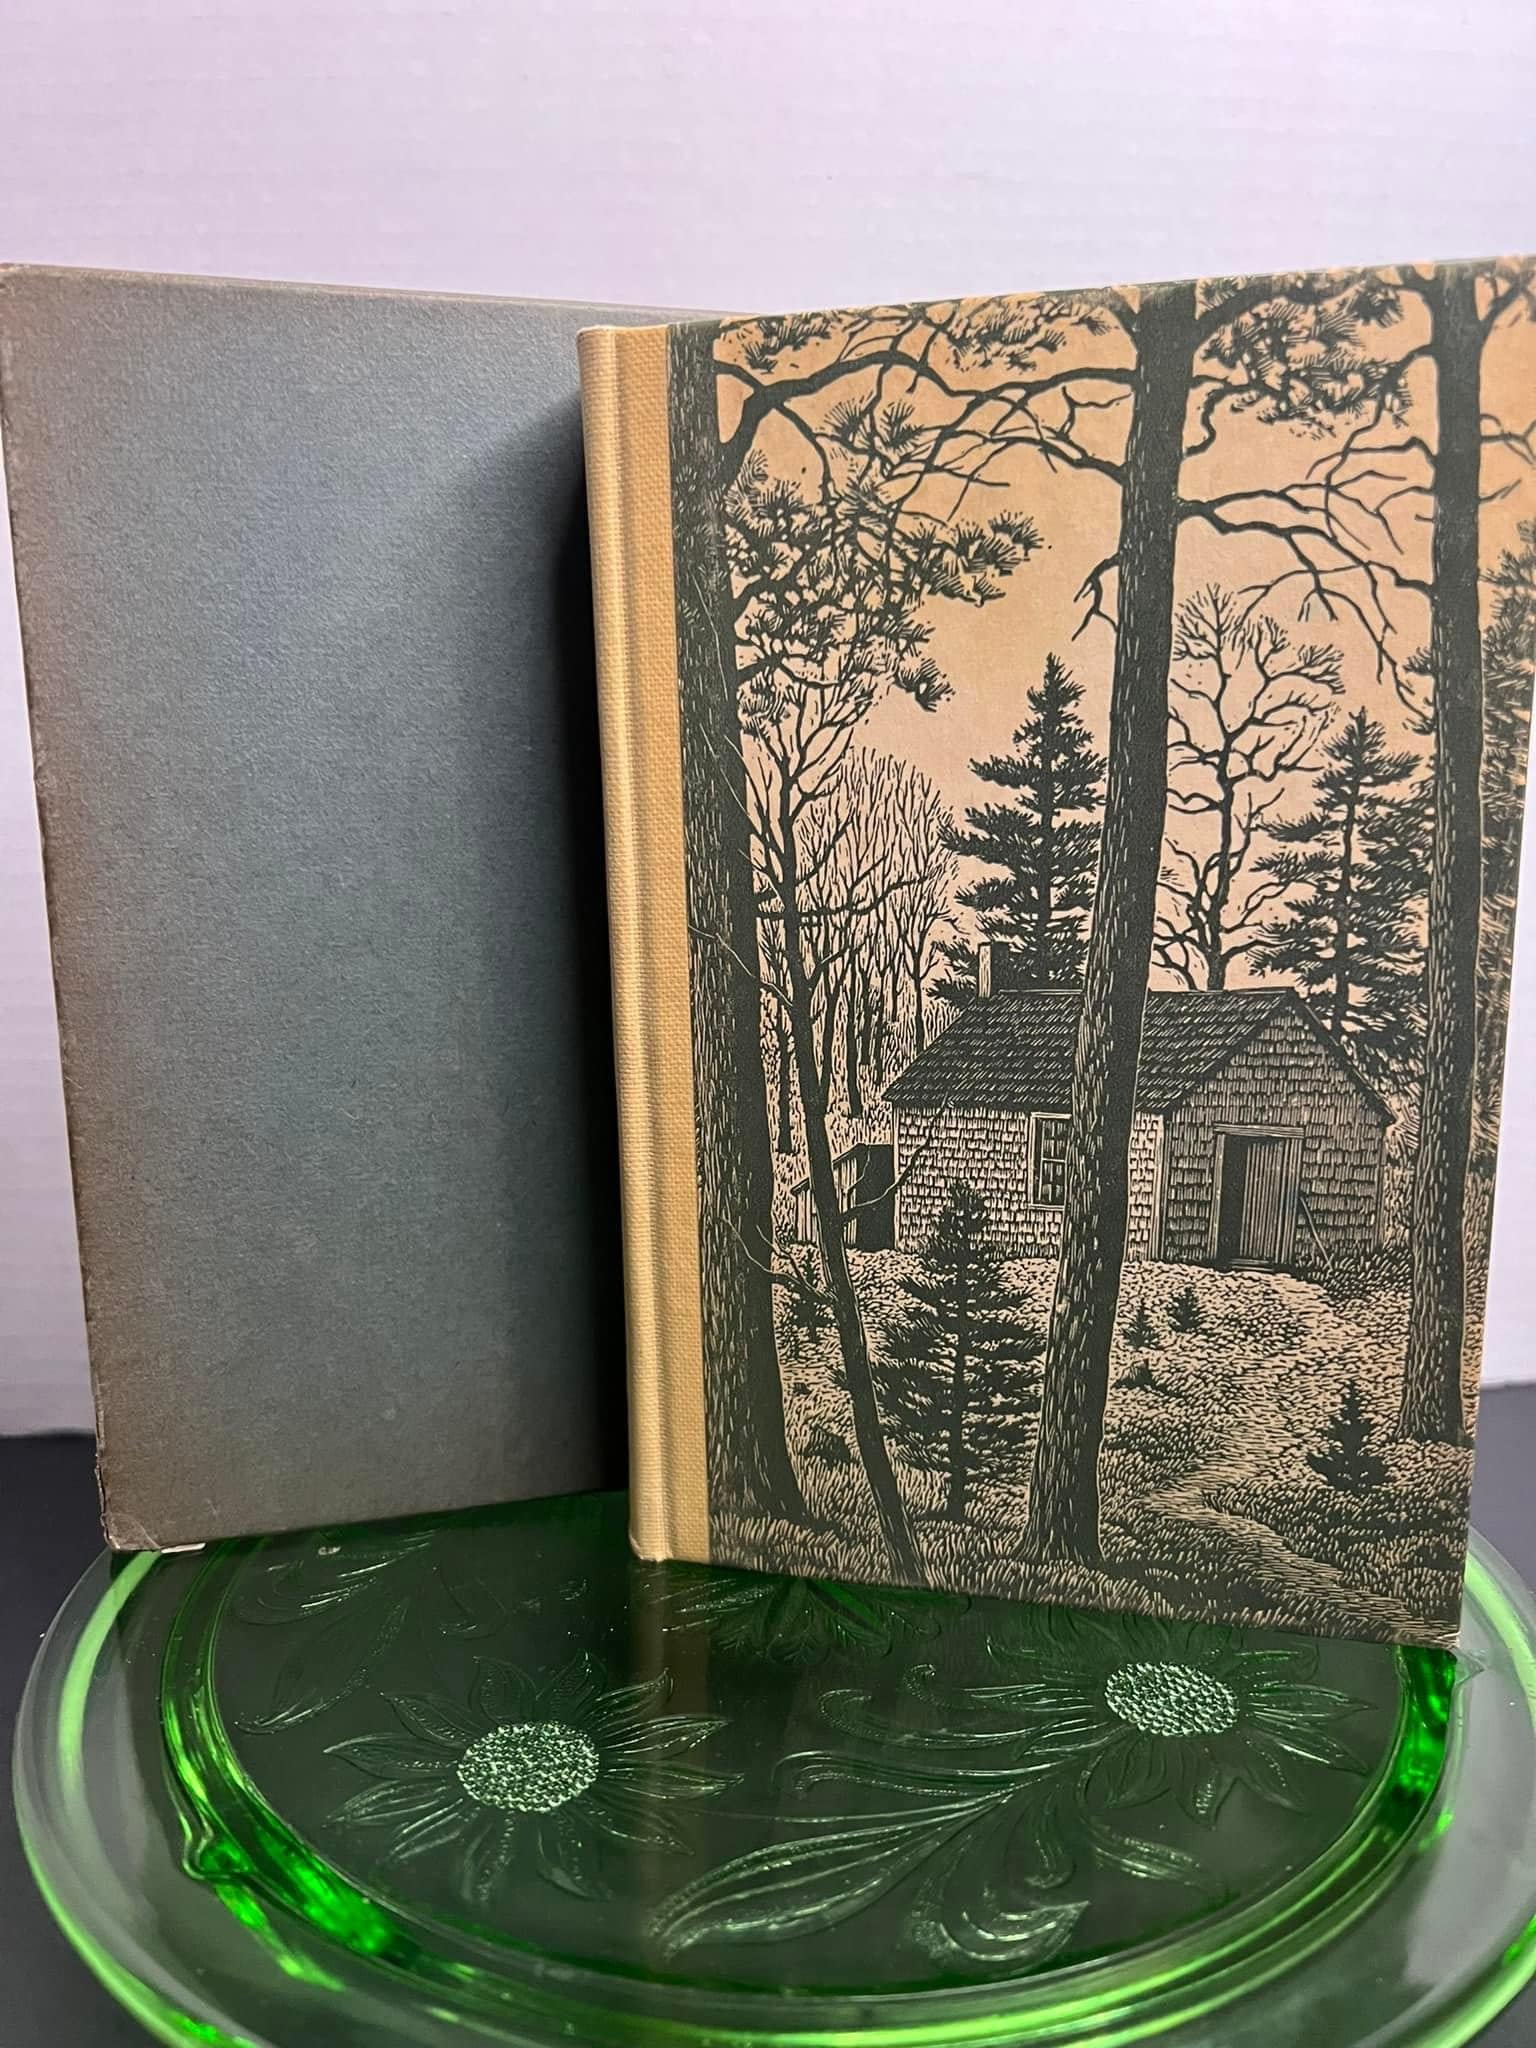 Vintage 1939 Walden or life in the woods By - Henry David thoreau Wood engravings by - Thomas w. Nason